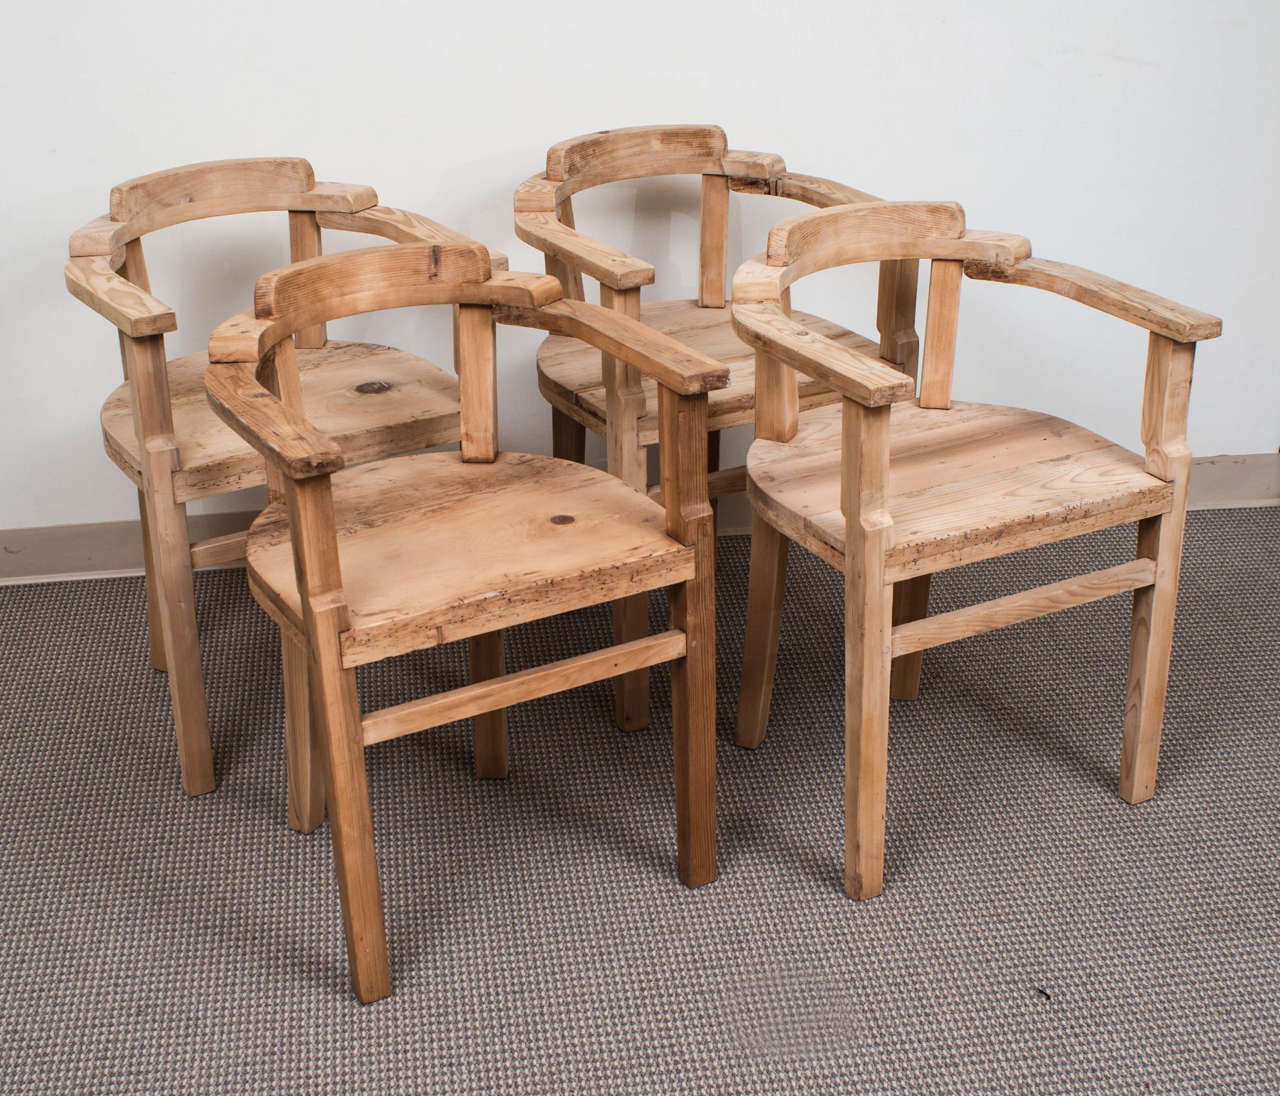 An unusual set of four small pine armchairs in a rustic 